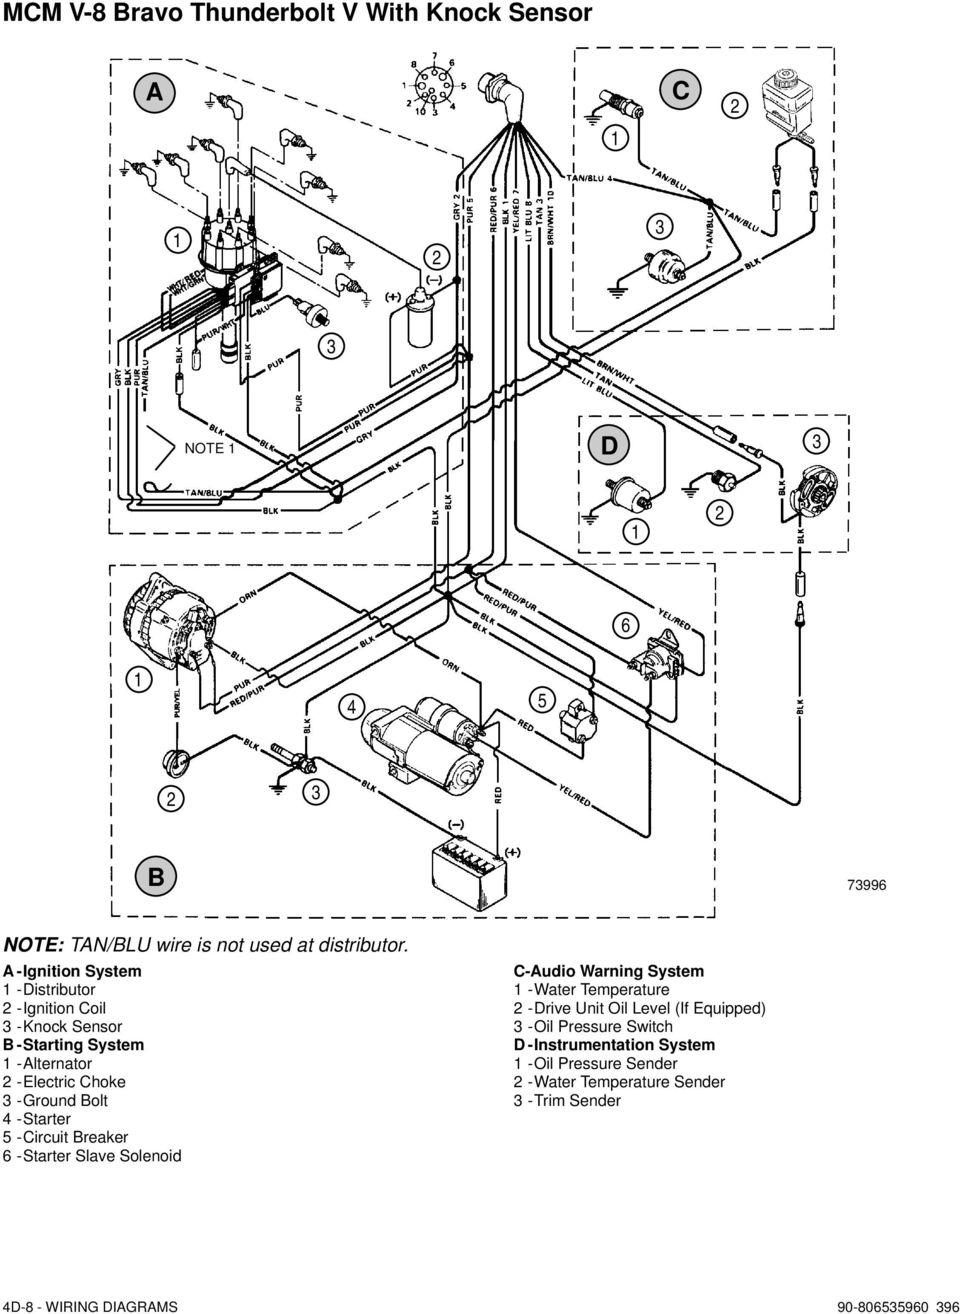 Electrical Systems Wiring Diagrams